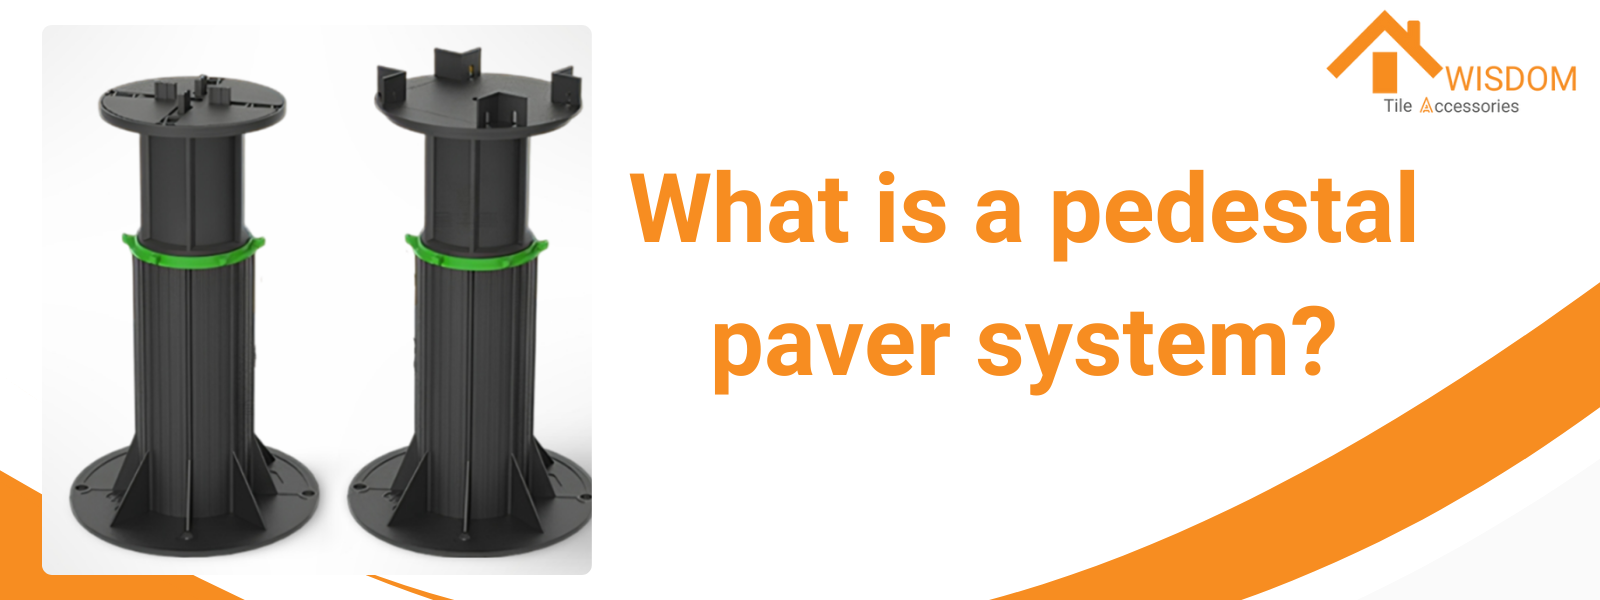 What is a pedestal paver system